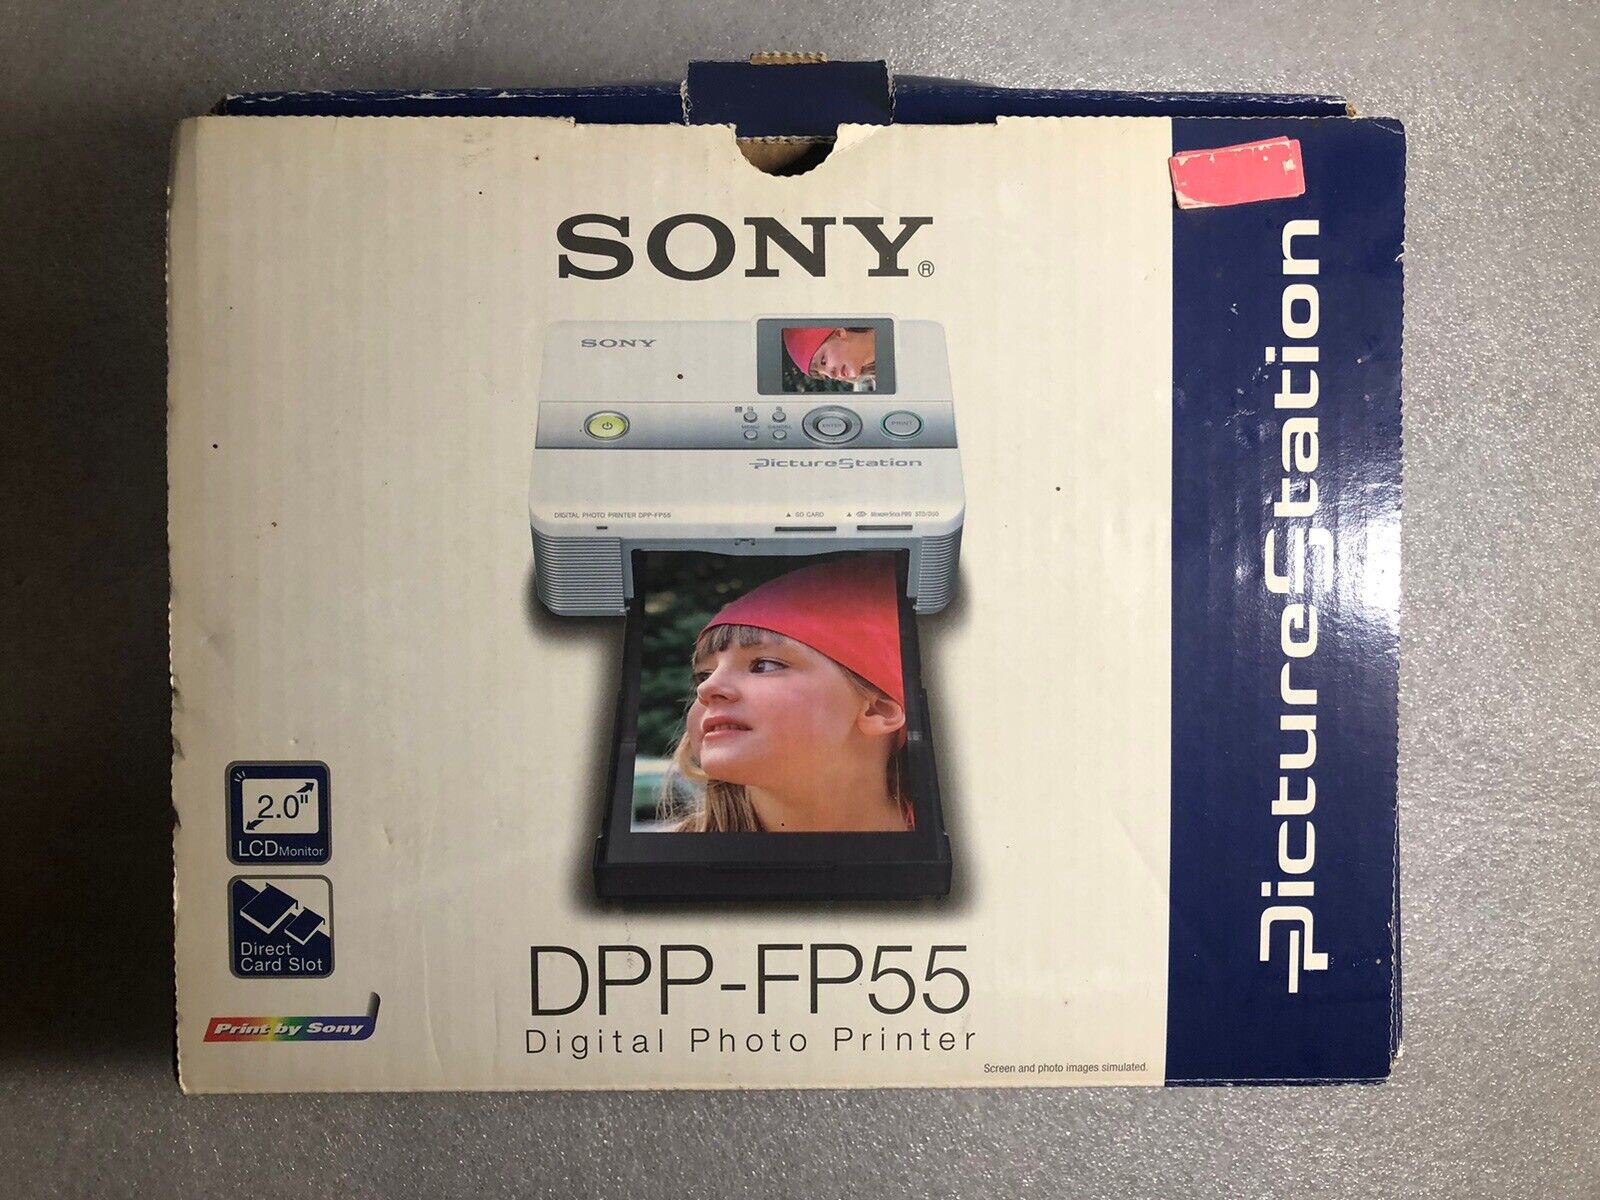 Sony Digital Photo Printer Picture Station DPP-FP55 - New - Open Box